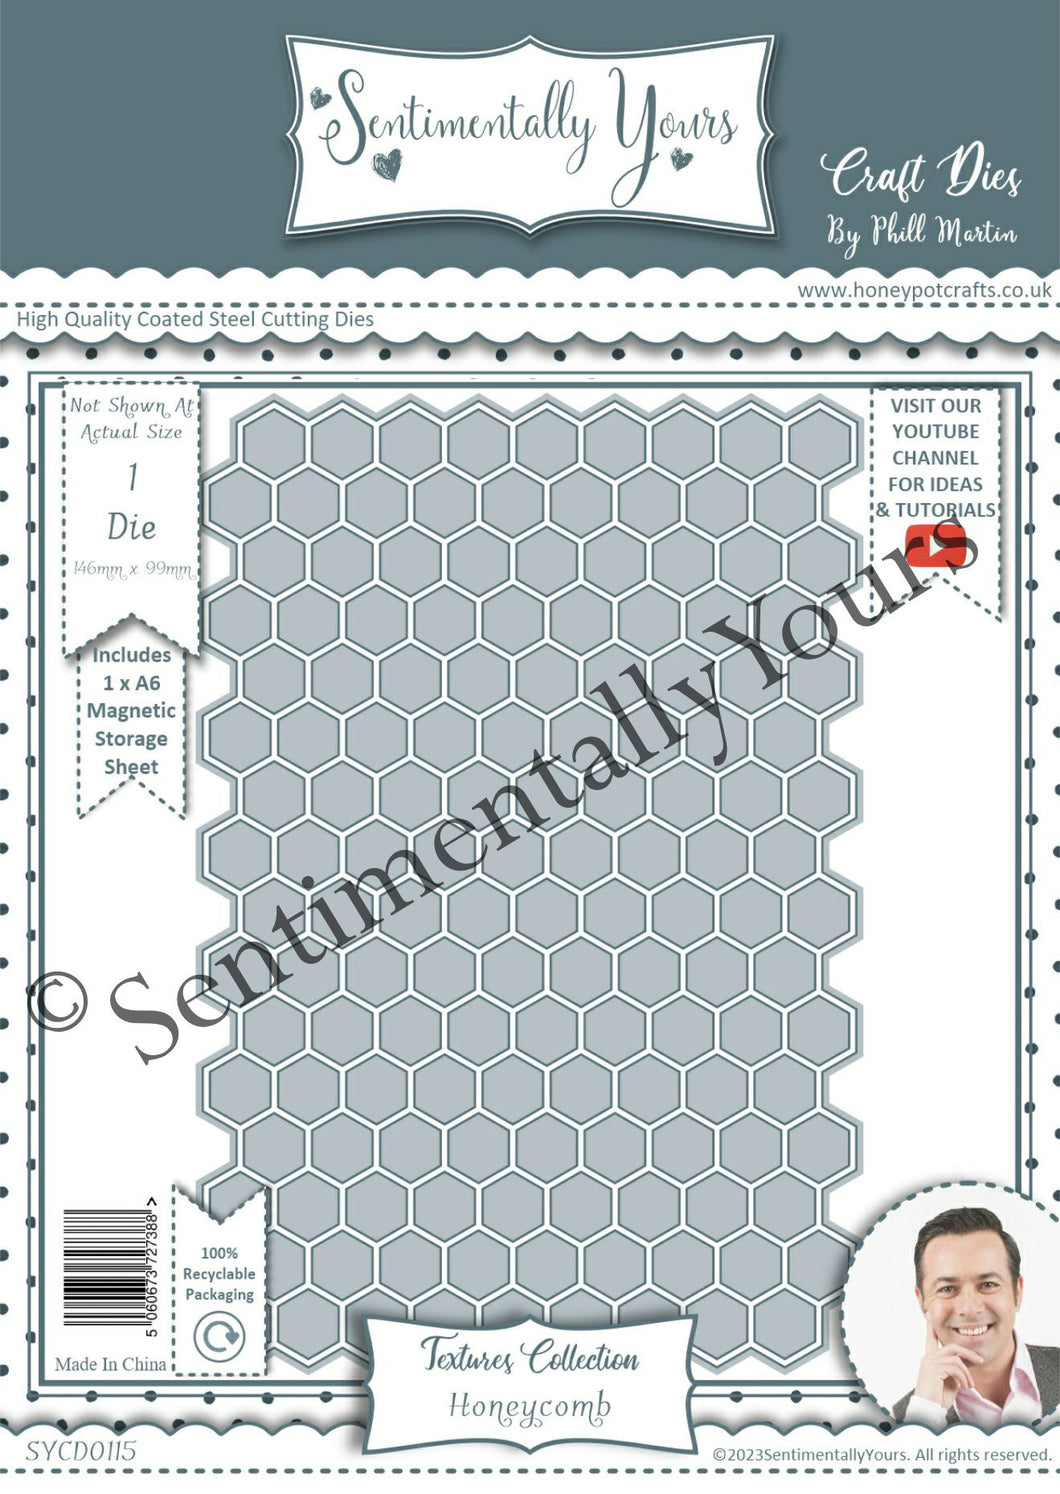 Phill Martin Sentimentally Yours Textures - A6 Honeycomb Die